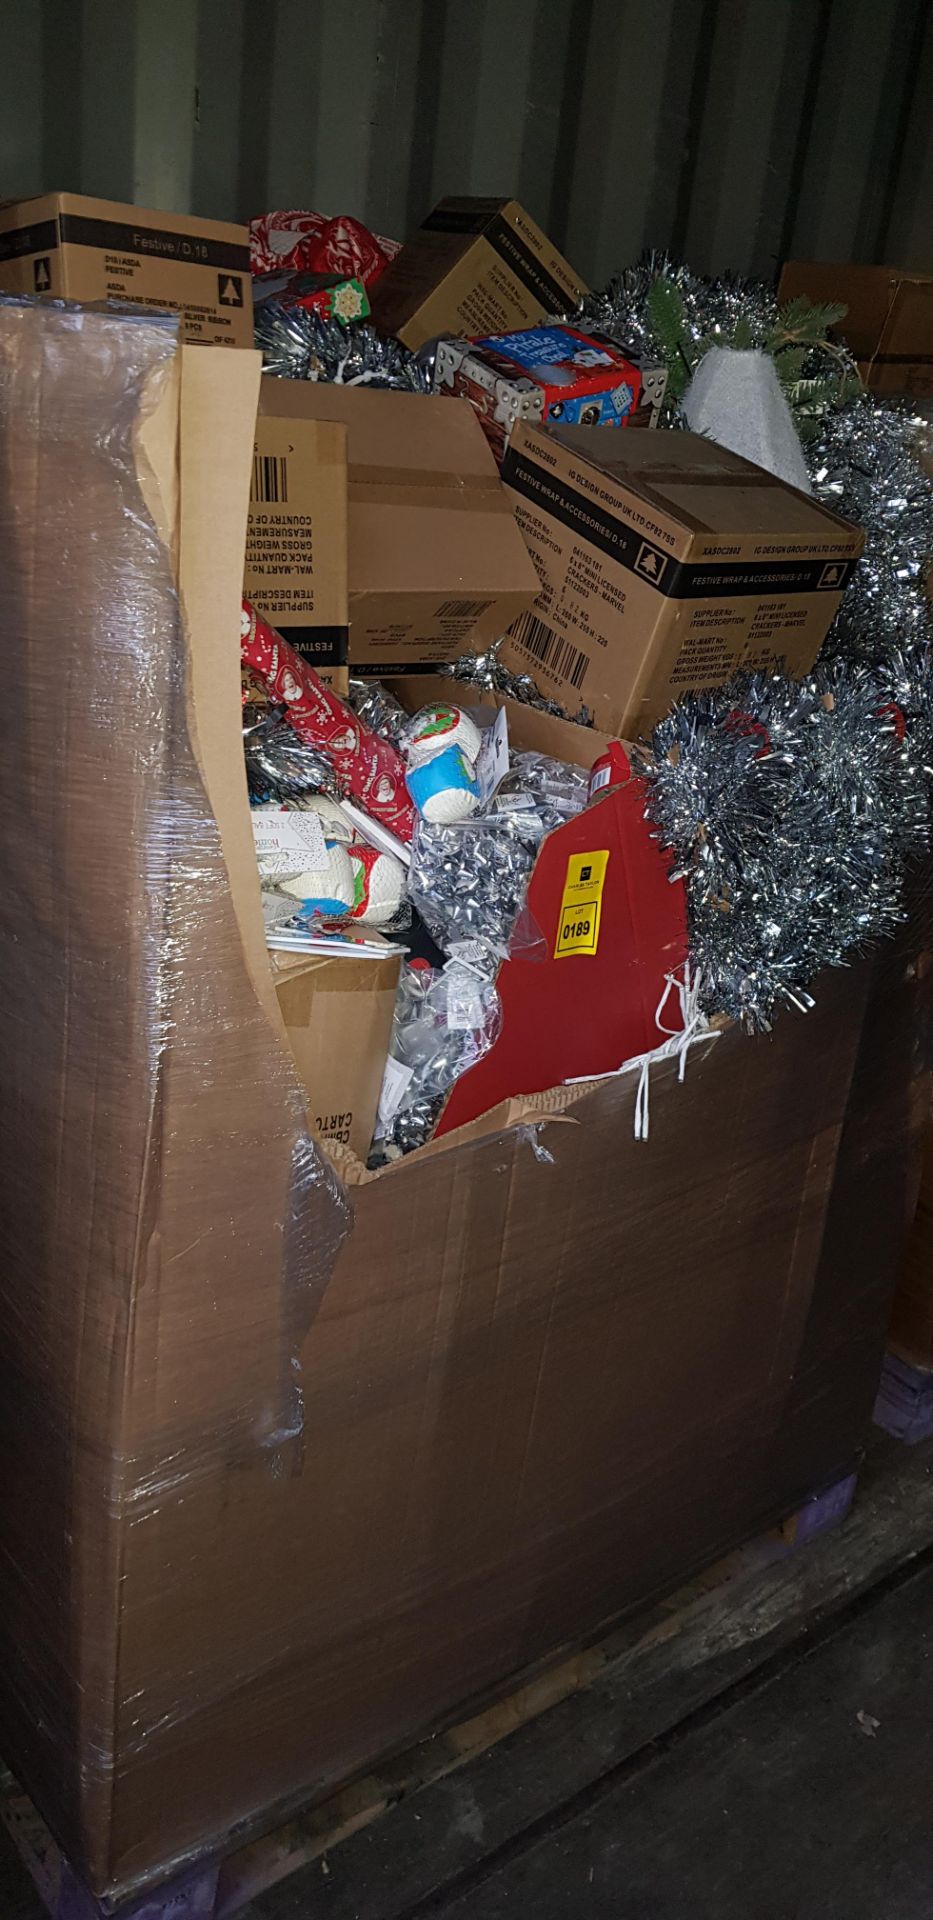 FULL PALLET MIXED CHRISTMAS ENGLAND LOT CONTAINING SILVER RIBBONS, MARVEL CRACKERS, 3M TINSELS, MAKE